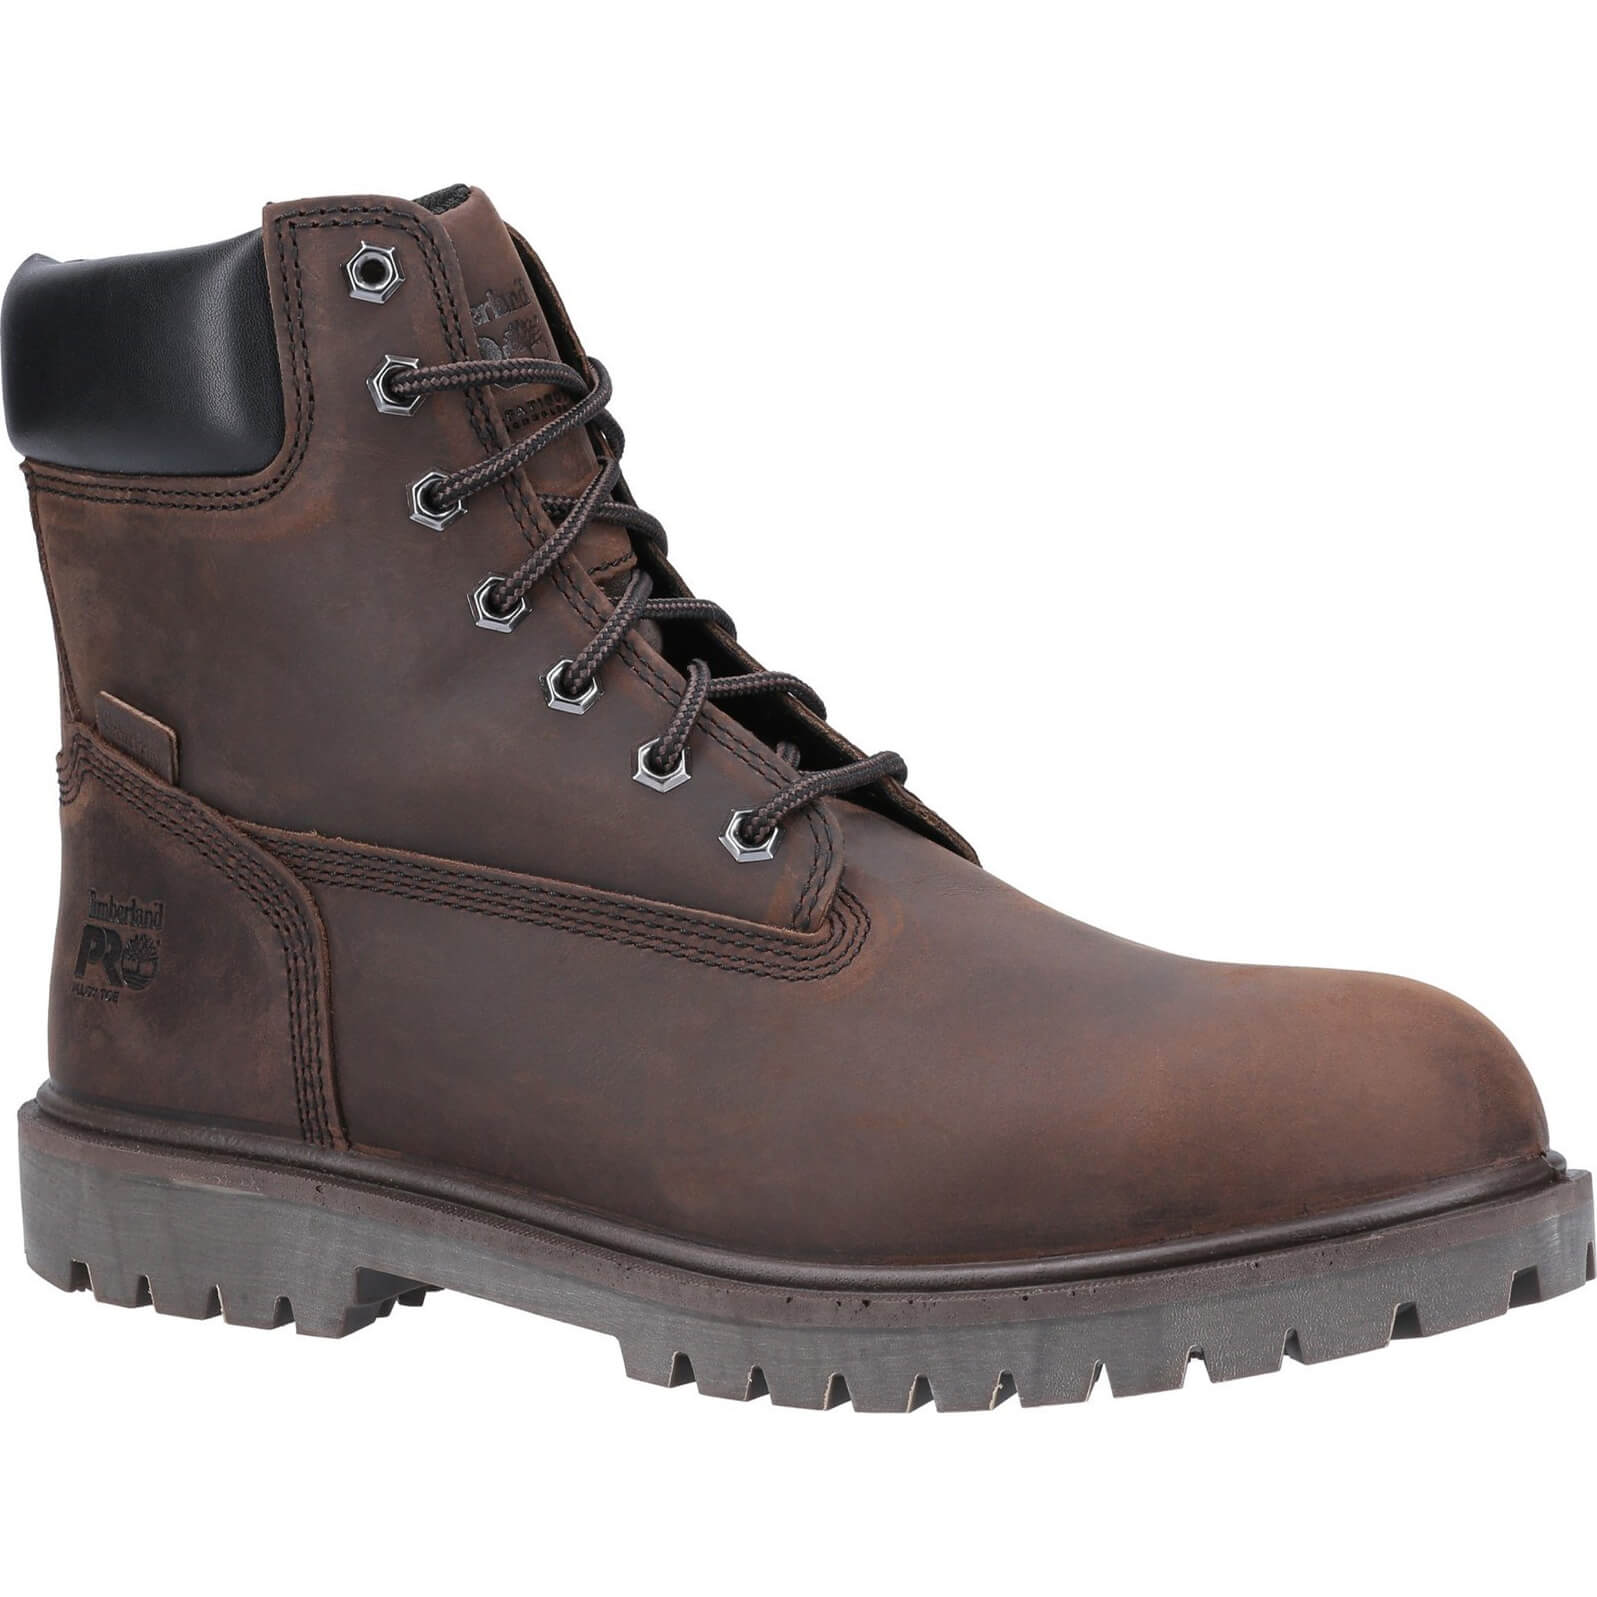 Image of Timberland Pro Iconic Safety Toe Work Boot Brown Size 8